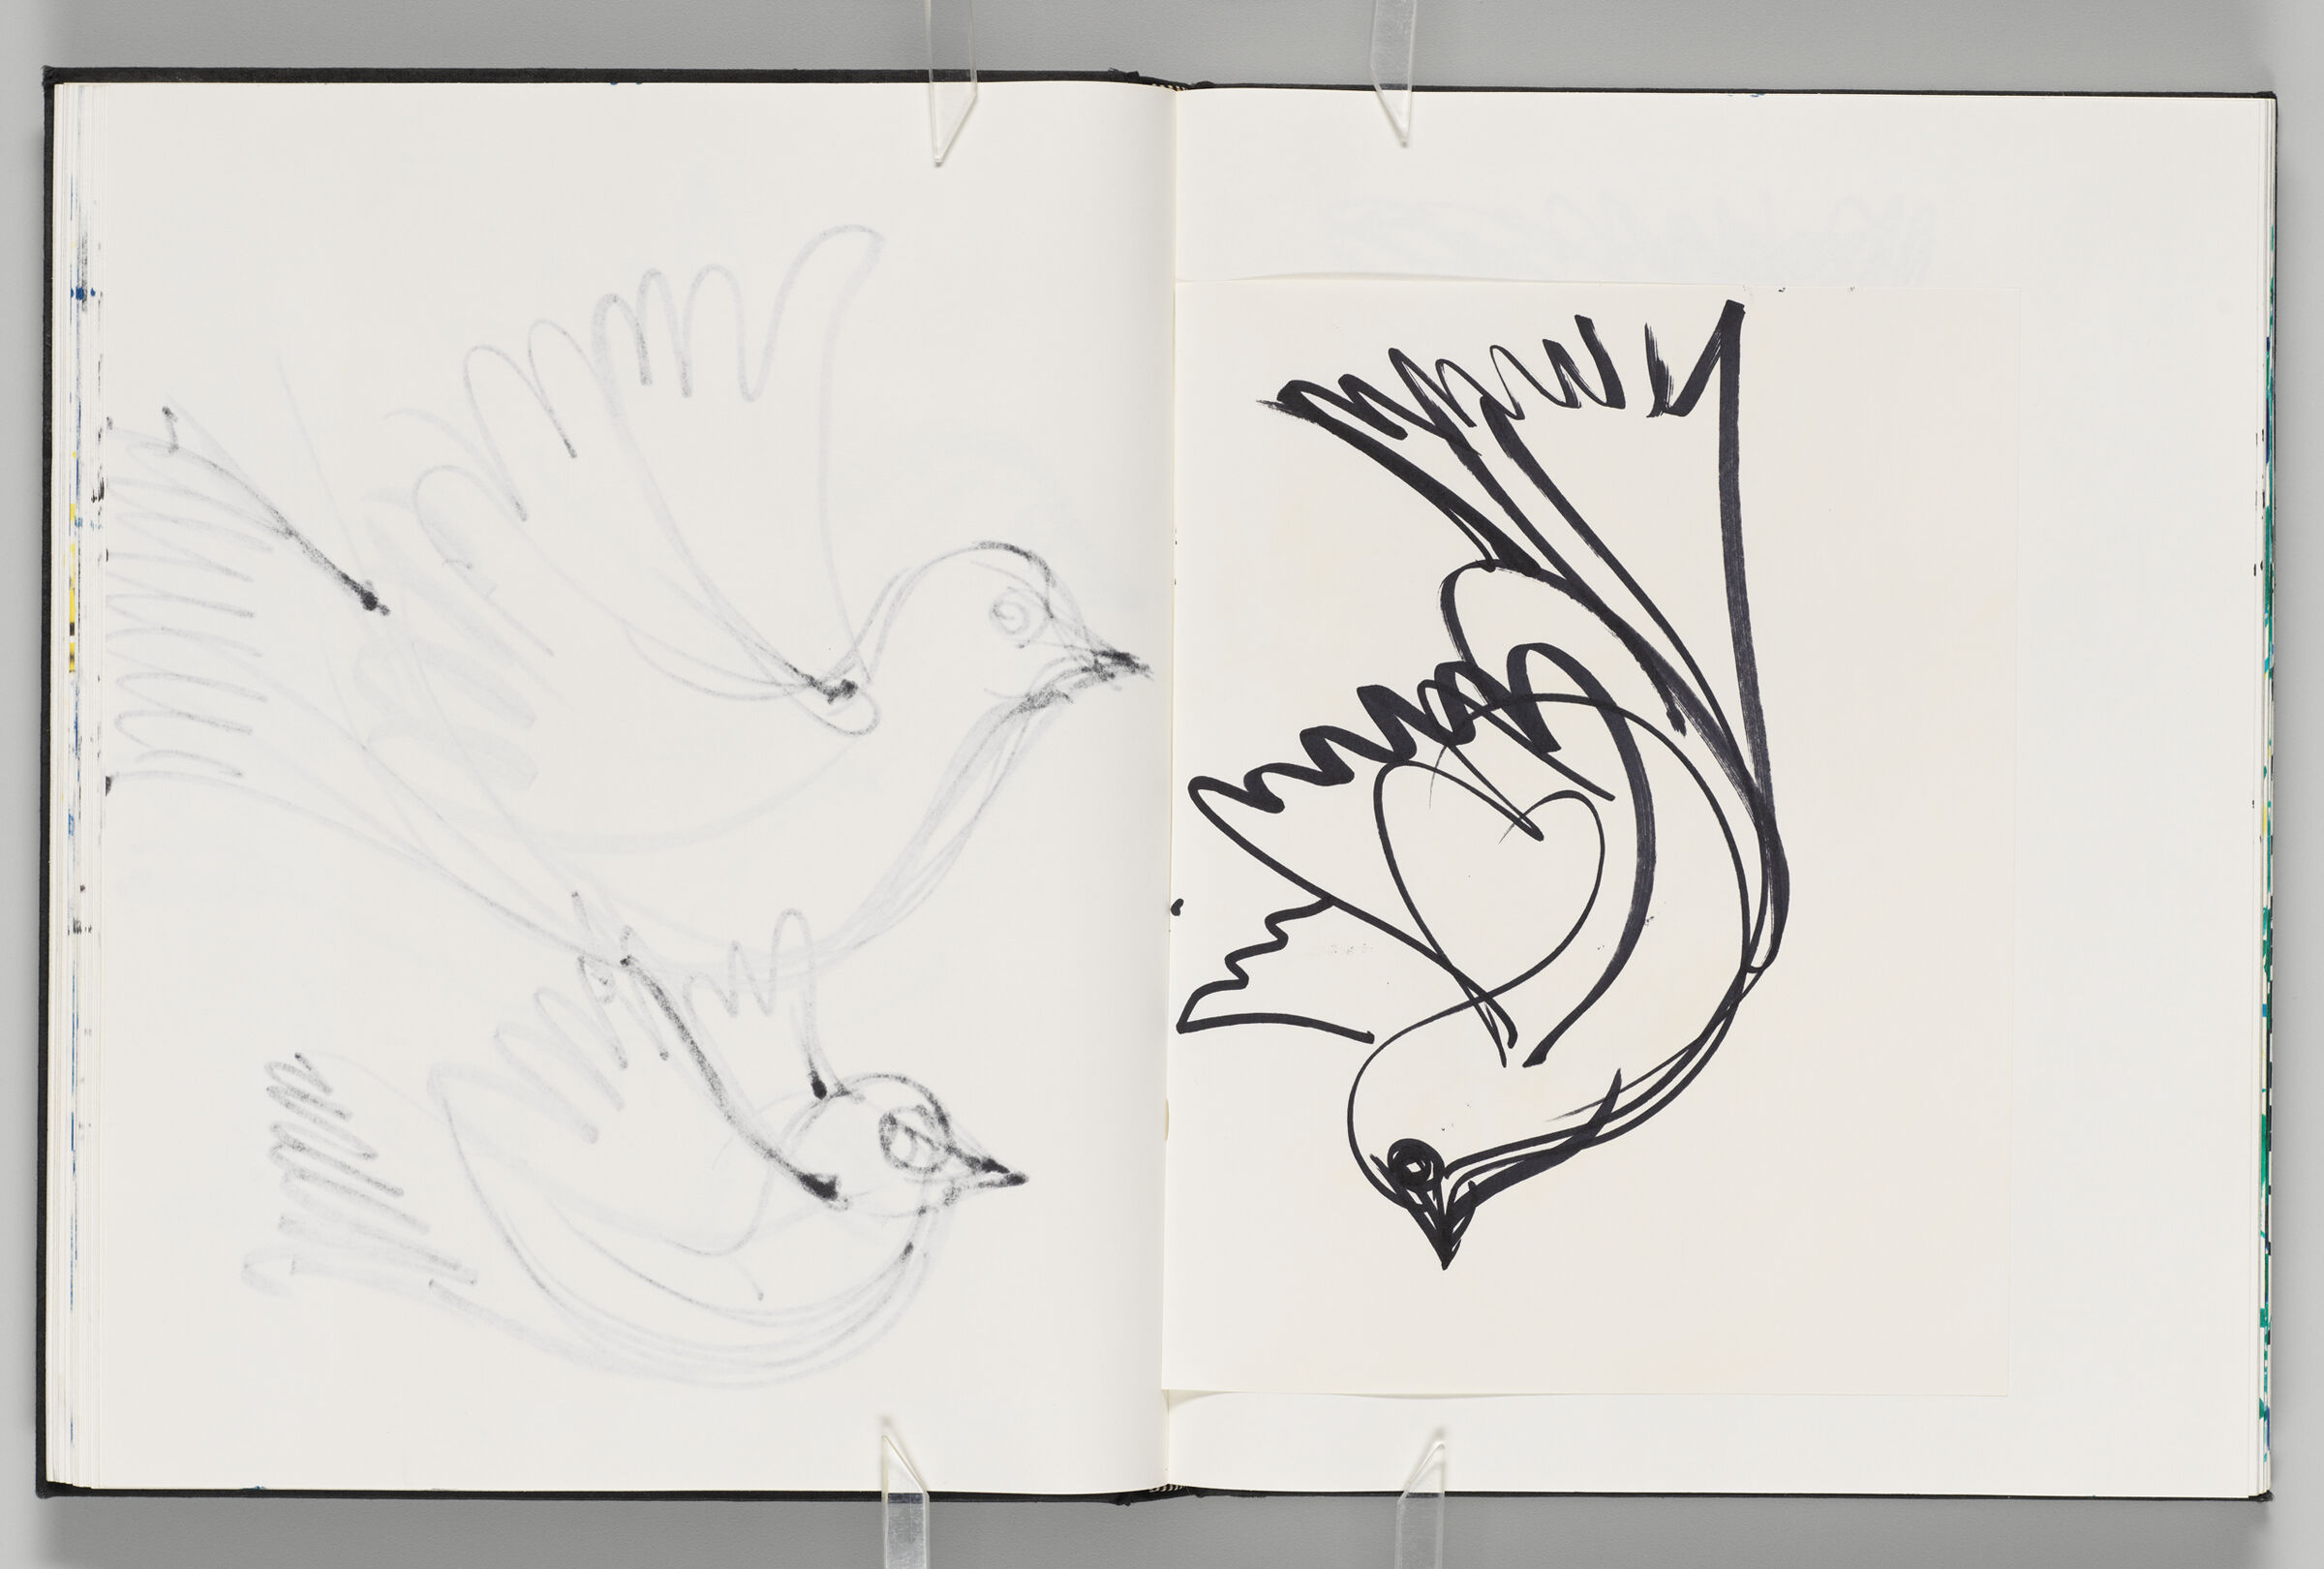 Untitled (Bleed-Through Of Previous Page, Left Page); Untitled (Dove On Adhered Sheet, Right Page)
